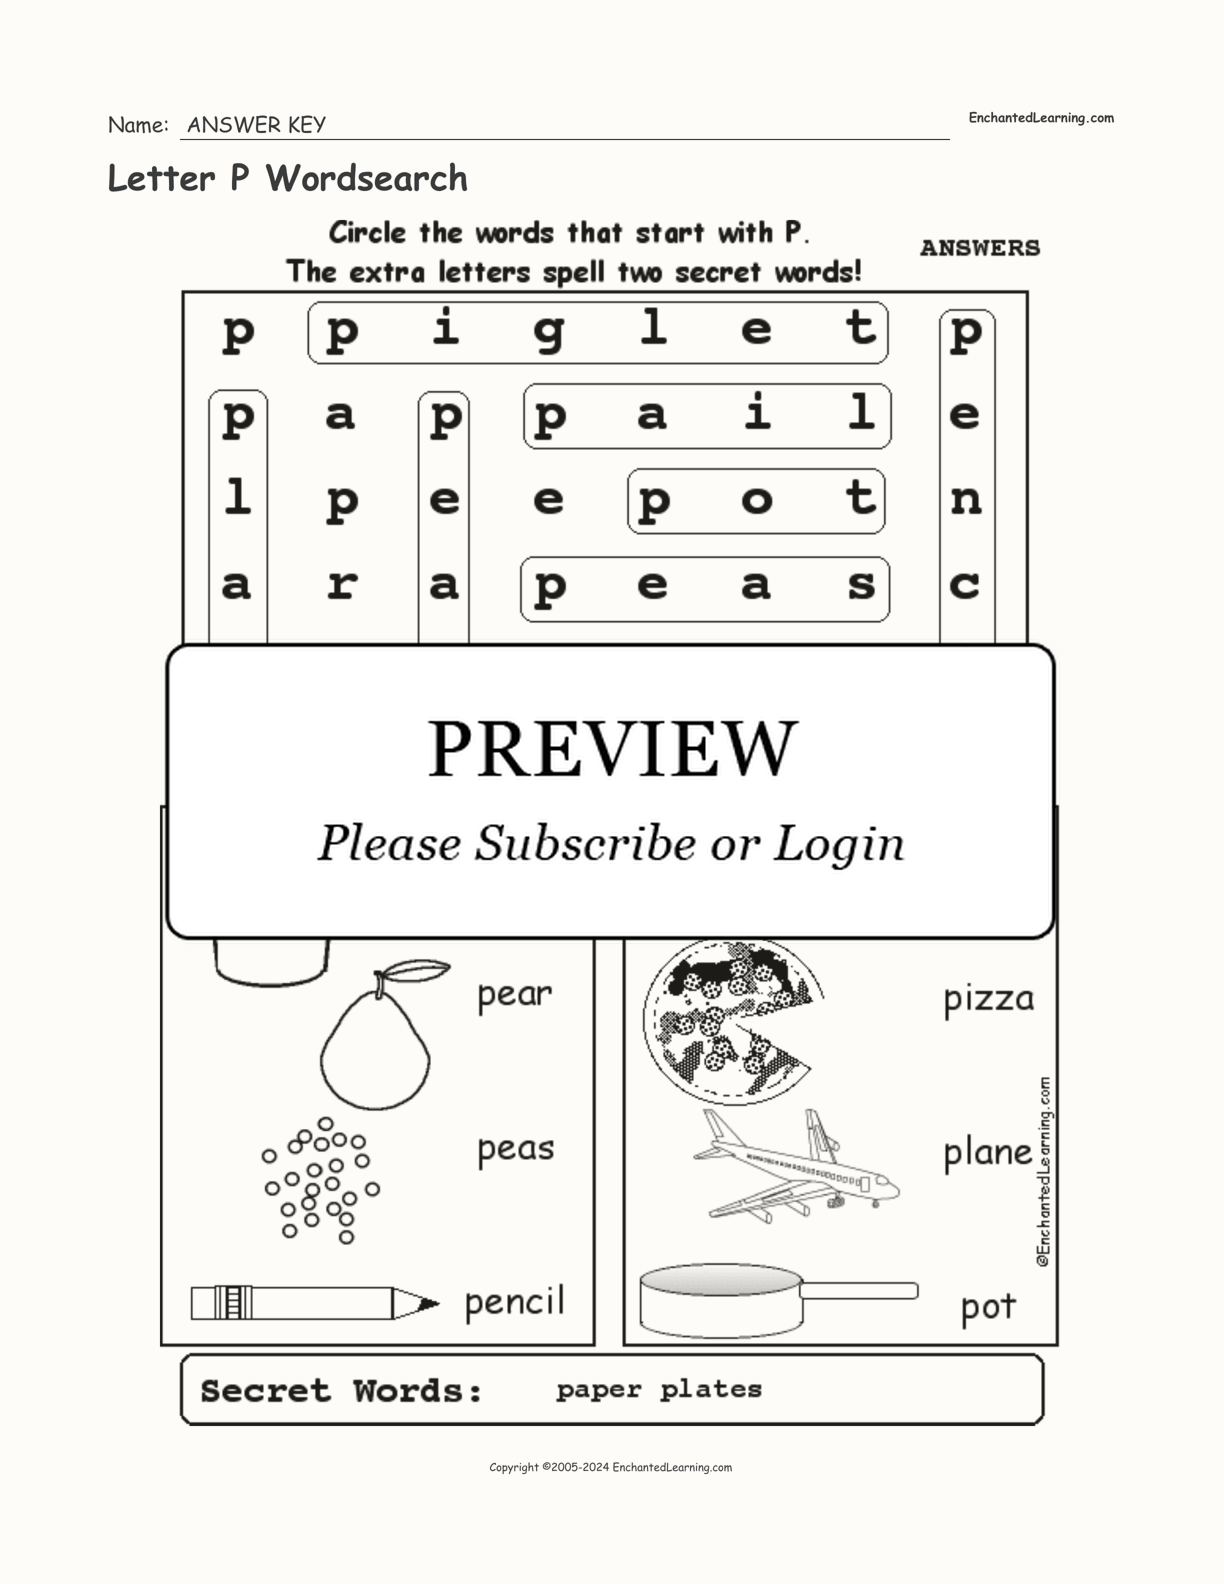 Letter P Wordsearch interactive worksheet page 2